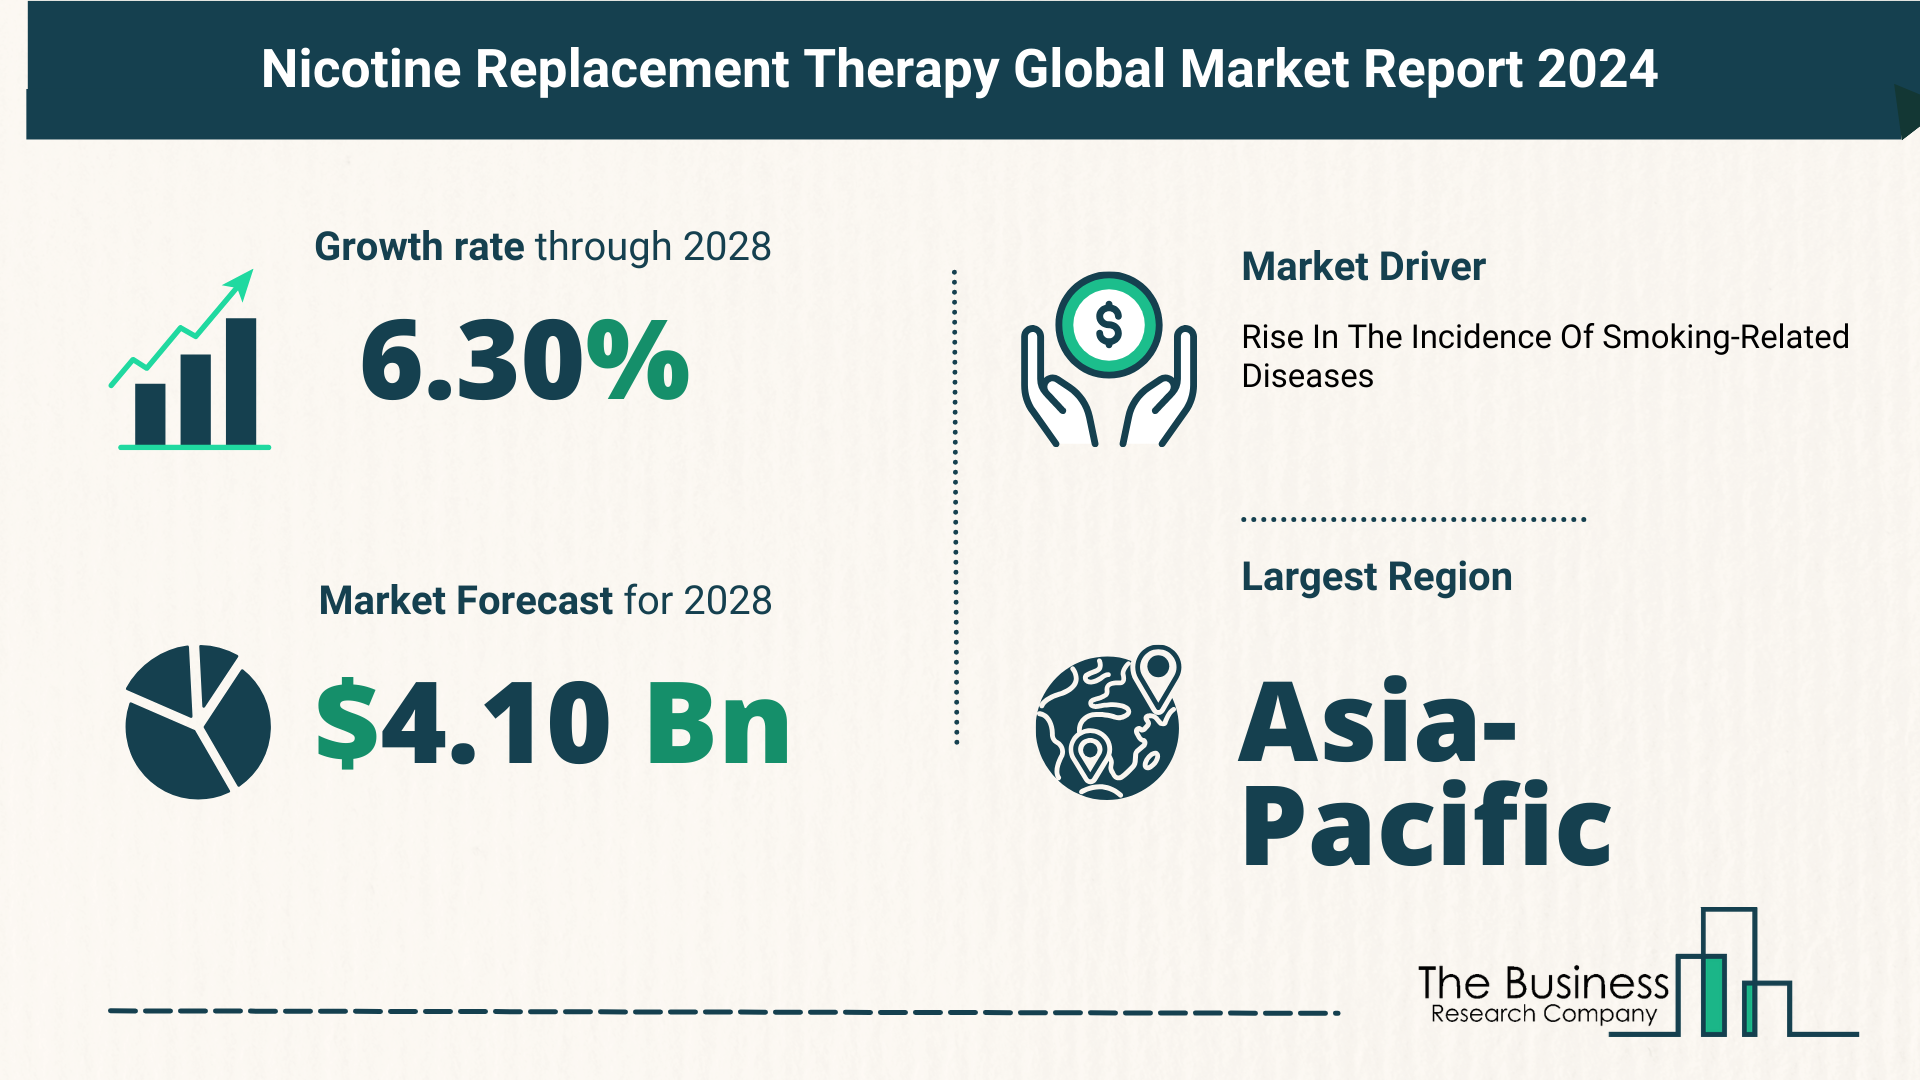 Nicotine Replacement Therapy Market Growth Analysis Till 2033 By The Business Research Company